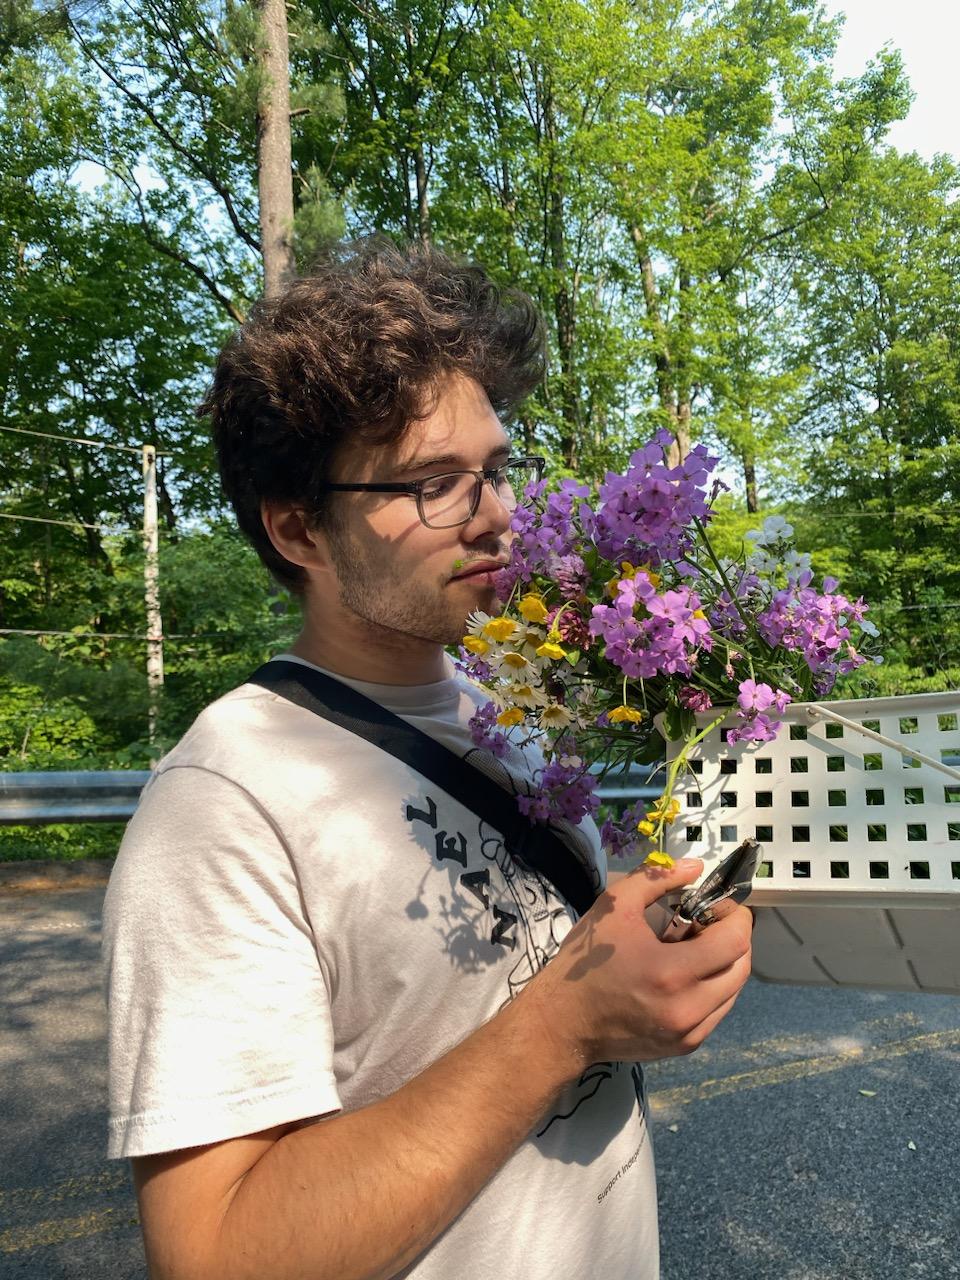 Jonathan, holding a basket of flowers with lowered eyes. He has brown hair and is wearing a white T-shirt